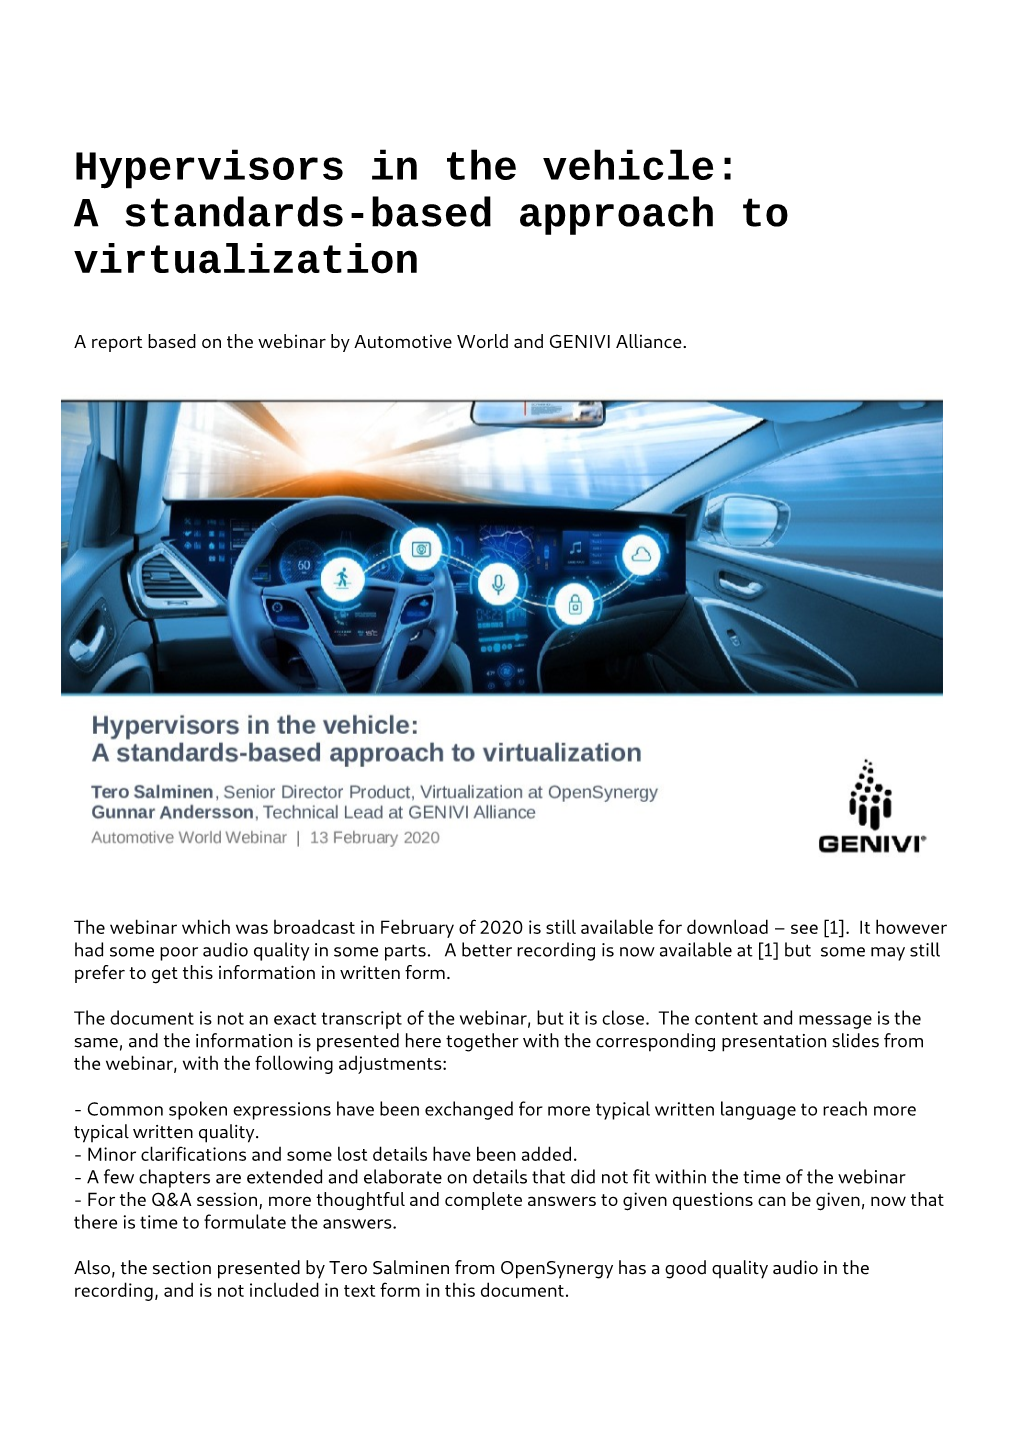 Hypervisors in the Vehicle: a Standards-Based Approach to Virtualization